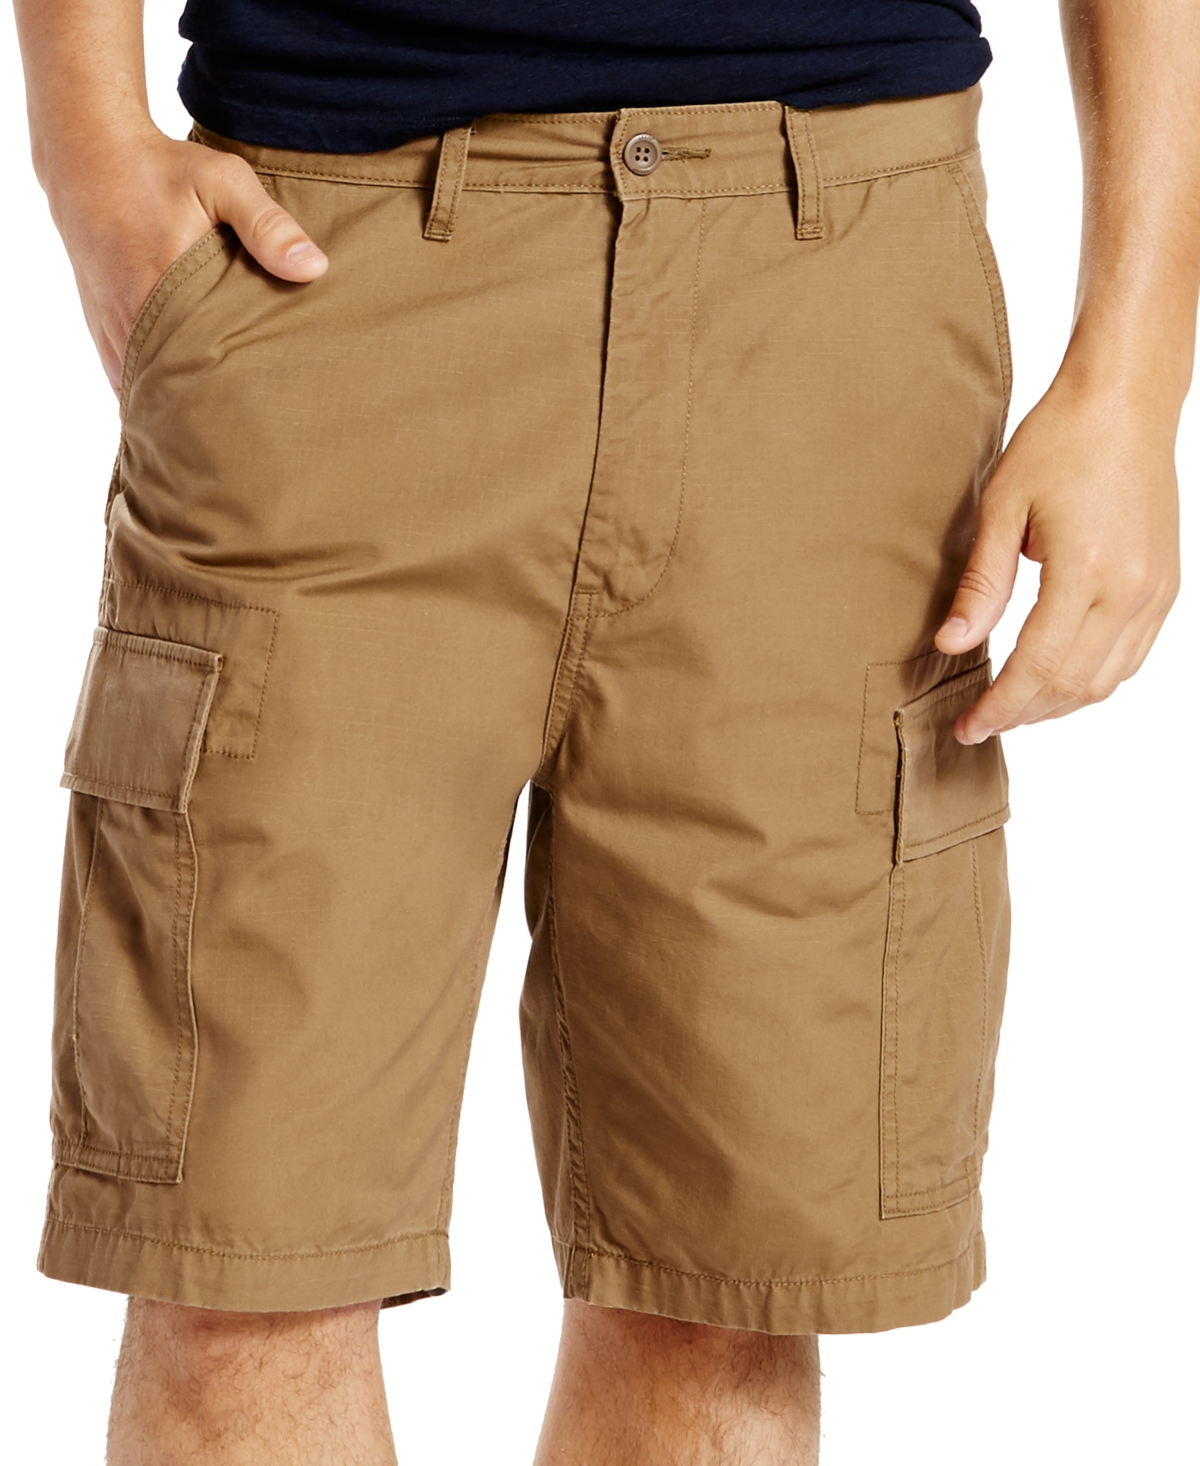 UPC 889319739371 product image for Levi's Men's Carrier Loose-Fit Cargo Shorts | upcitemdb.com